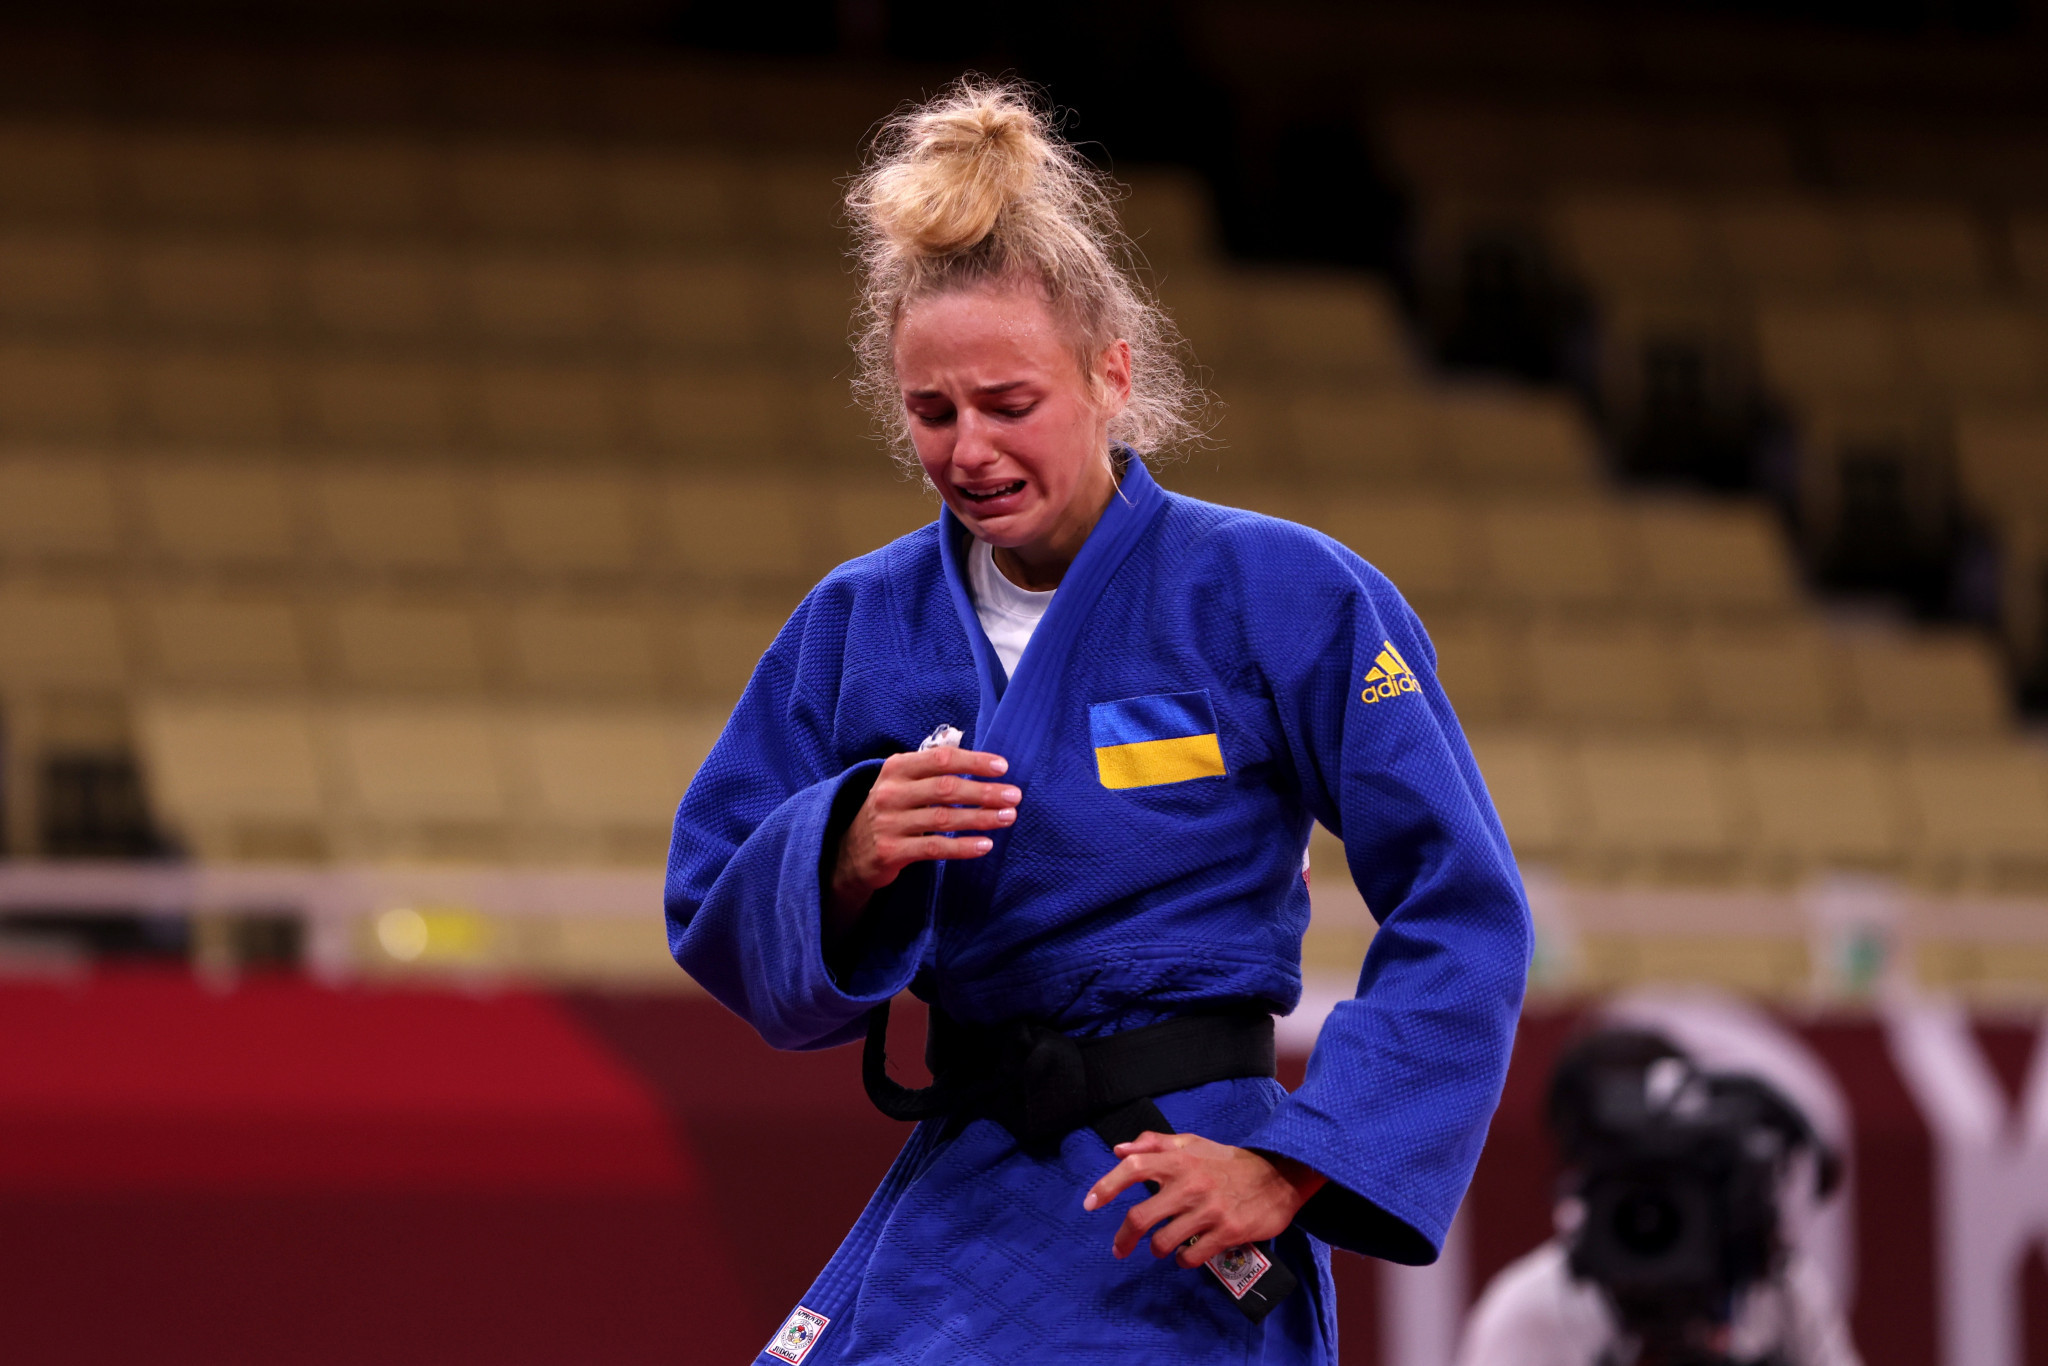 Double world champion Daria Bilodid did not compete in Doha after Ukraine opted to boycott the tournament over the presence of Russia and Belarus ©Getty Images